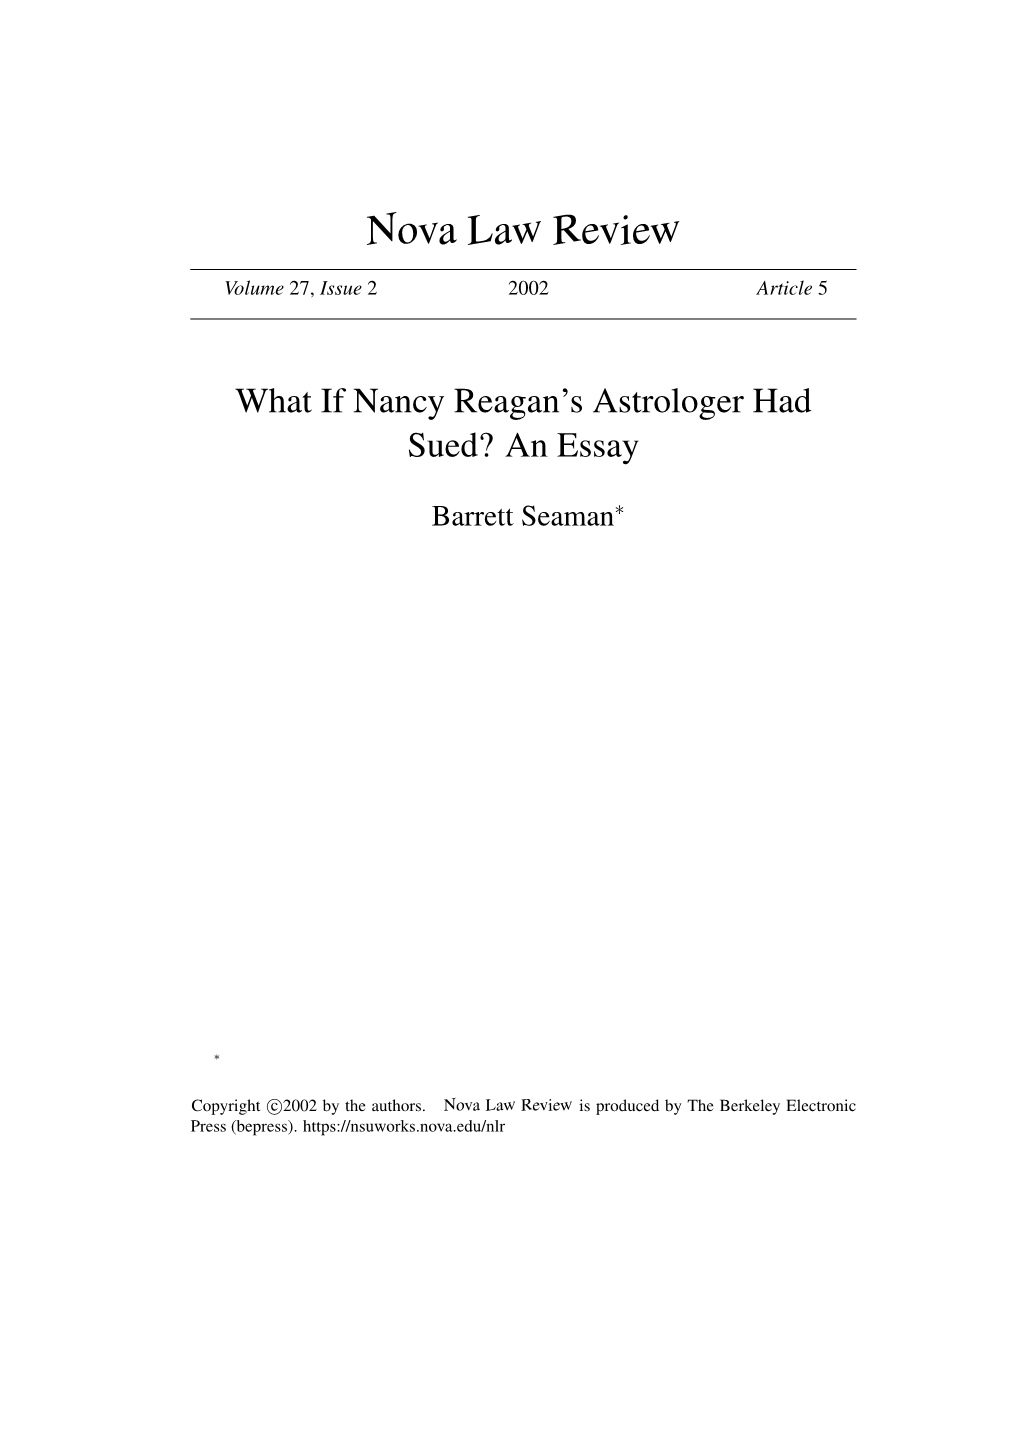 What If Nancy Reagan's Astrologer Had Sued? an Essay